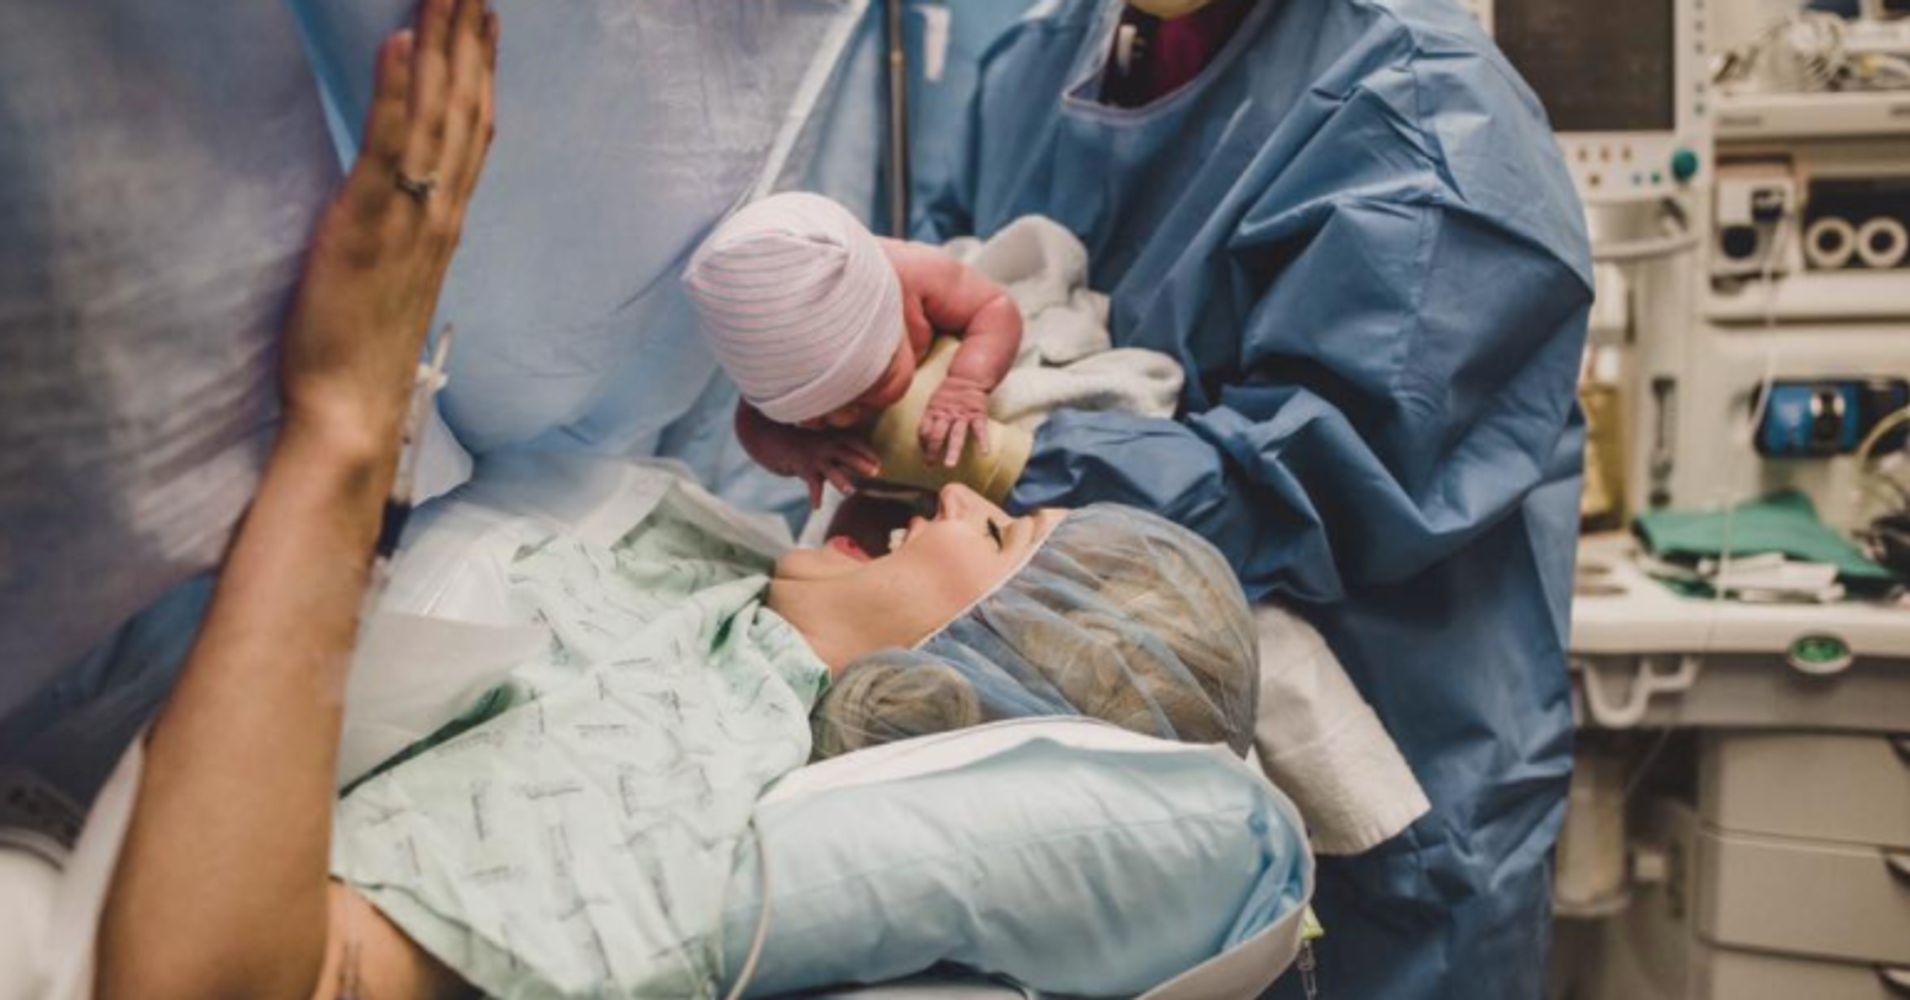 26 Stunning Photos That Capture The Sheer Strength Of C Section Moms